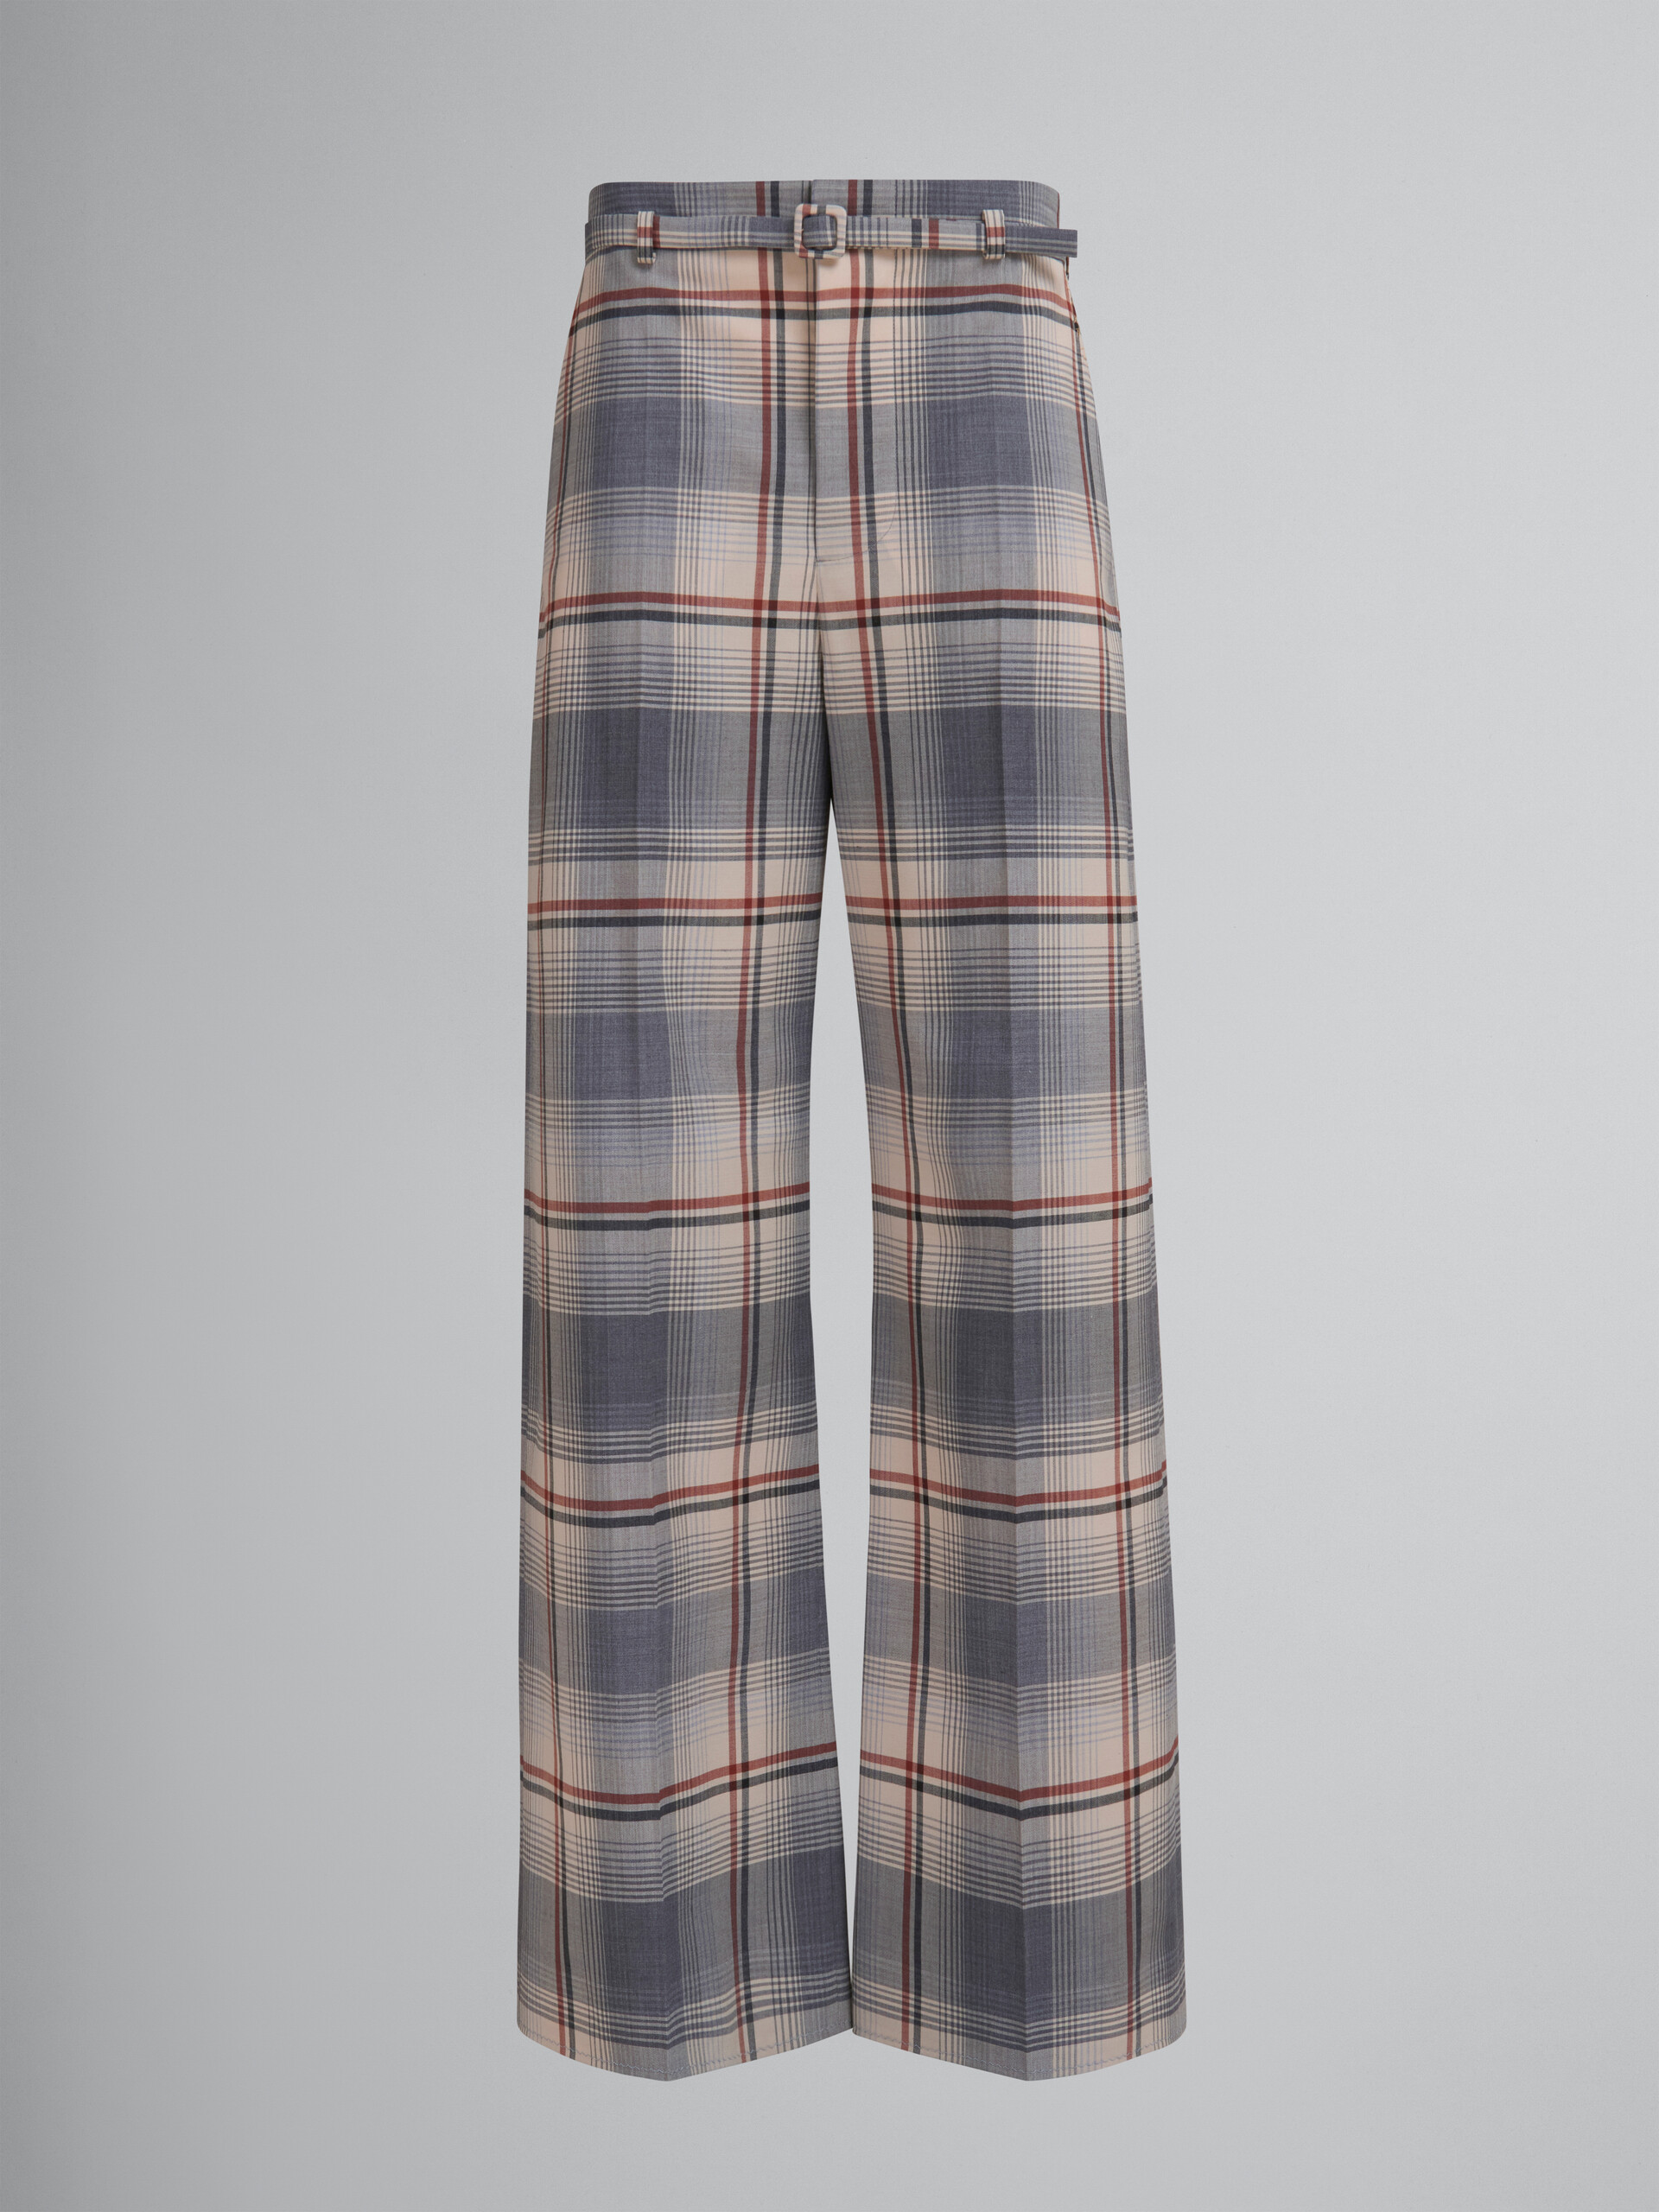 Grey checked wool trousers with belt - Pants - Image 1